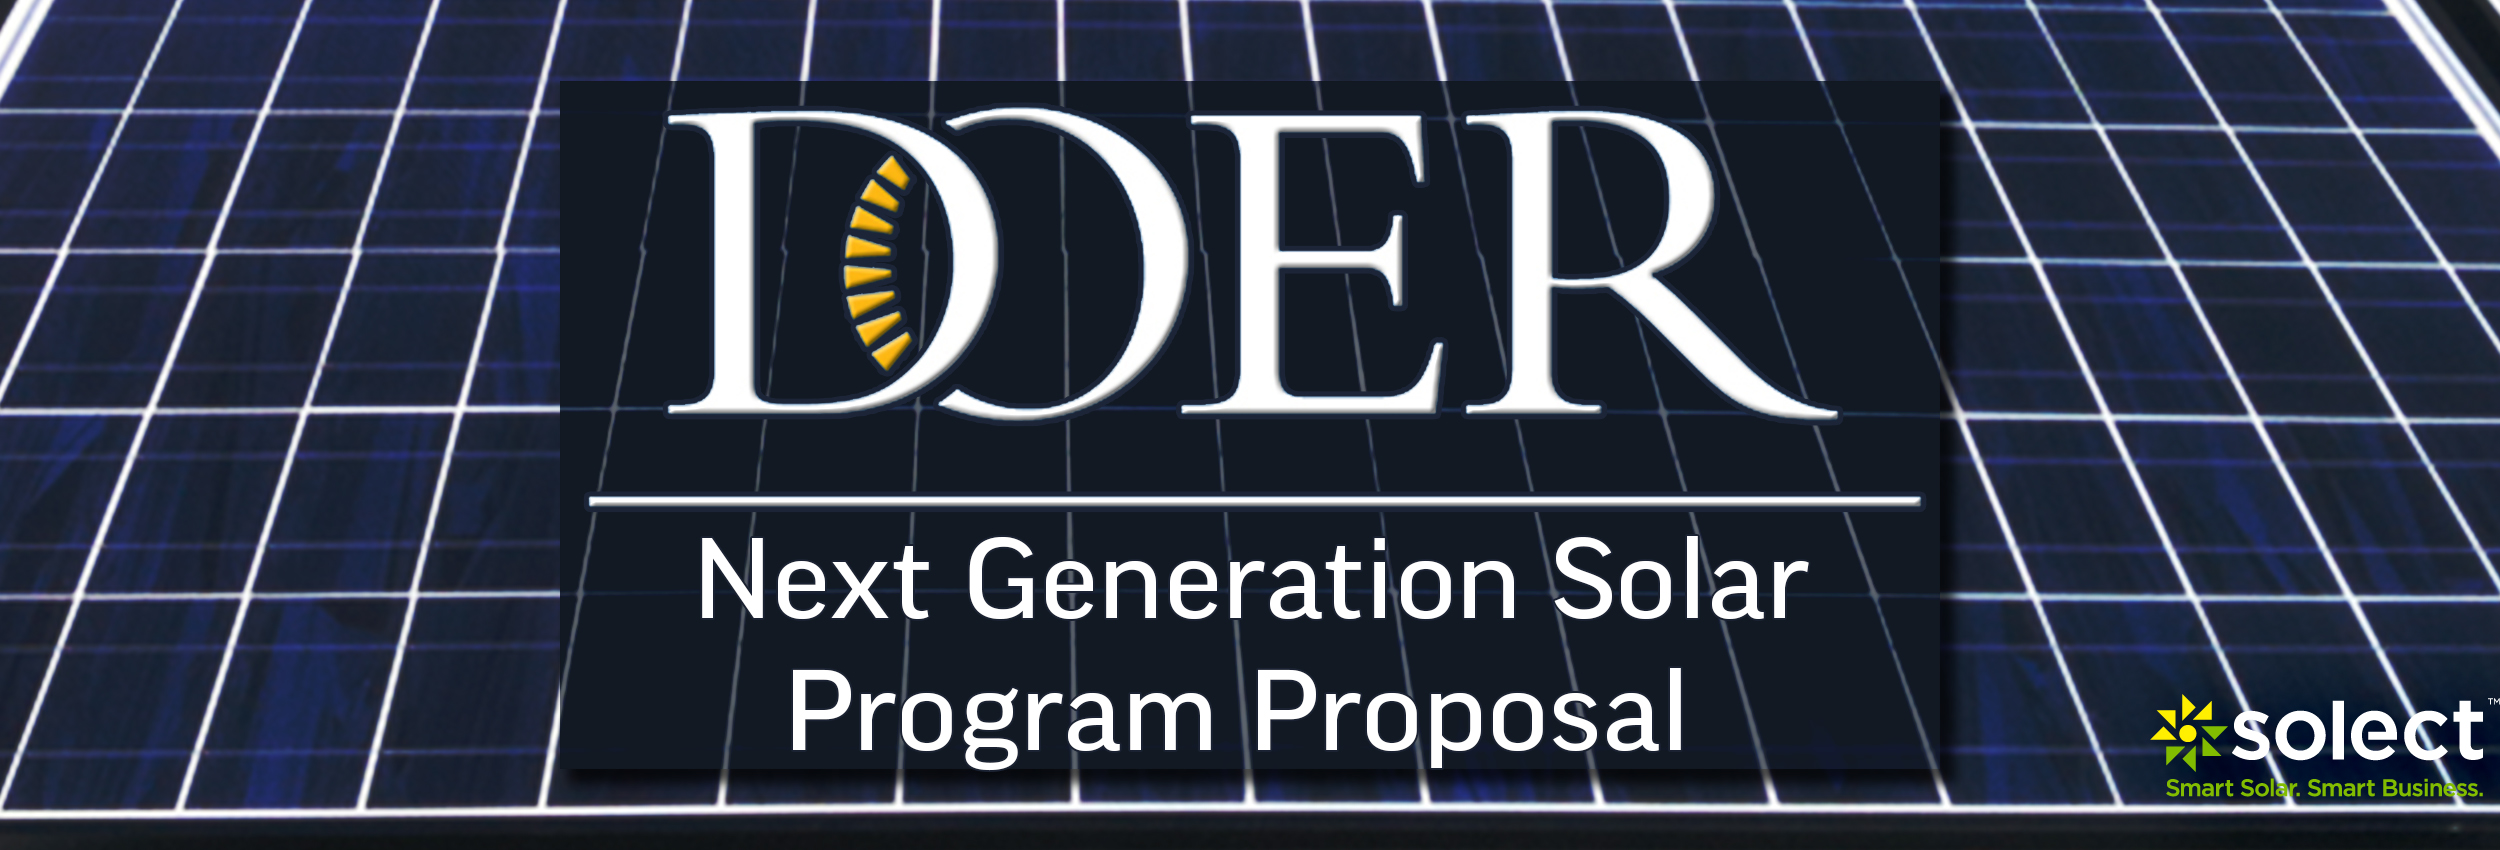 On Friday, the Massachusetts DOER met to announce the proposal of a new solar incentive program that would be effective January 1, 2017. It is a tariff-based incentive, as the DOER feels that is the most cost-effective approach. The program calls for the development of 1,600 MW of solar energy and a declining block model for pricing purposes. Here is a deeper look into the criteria and design details, which at this point are subject to change: